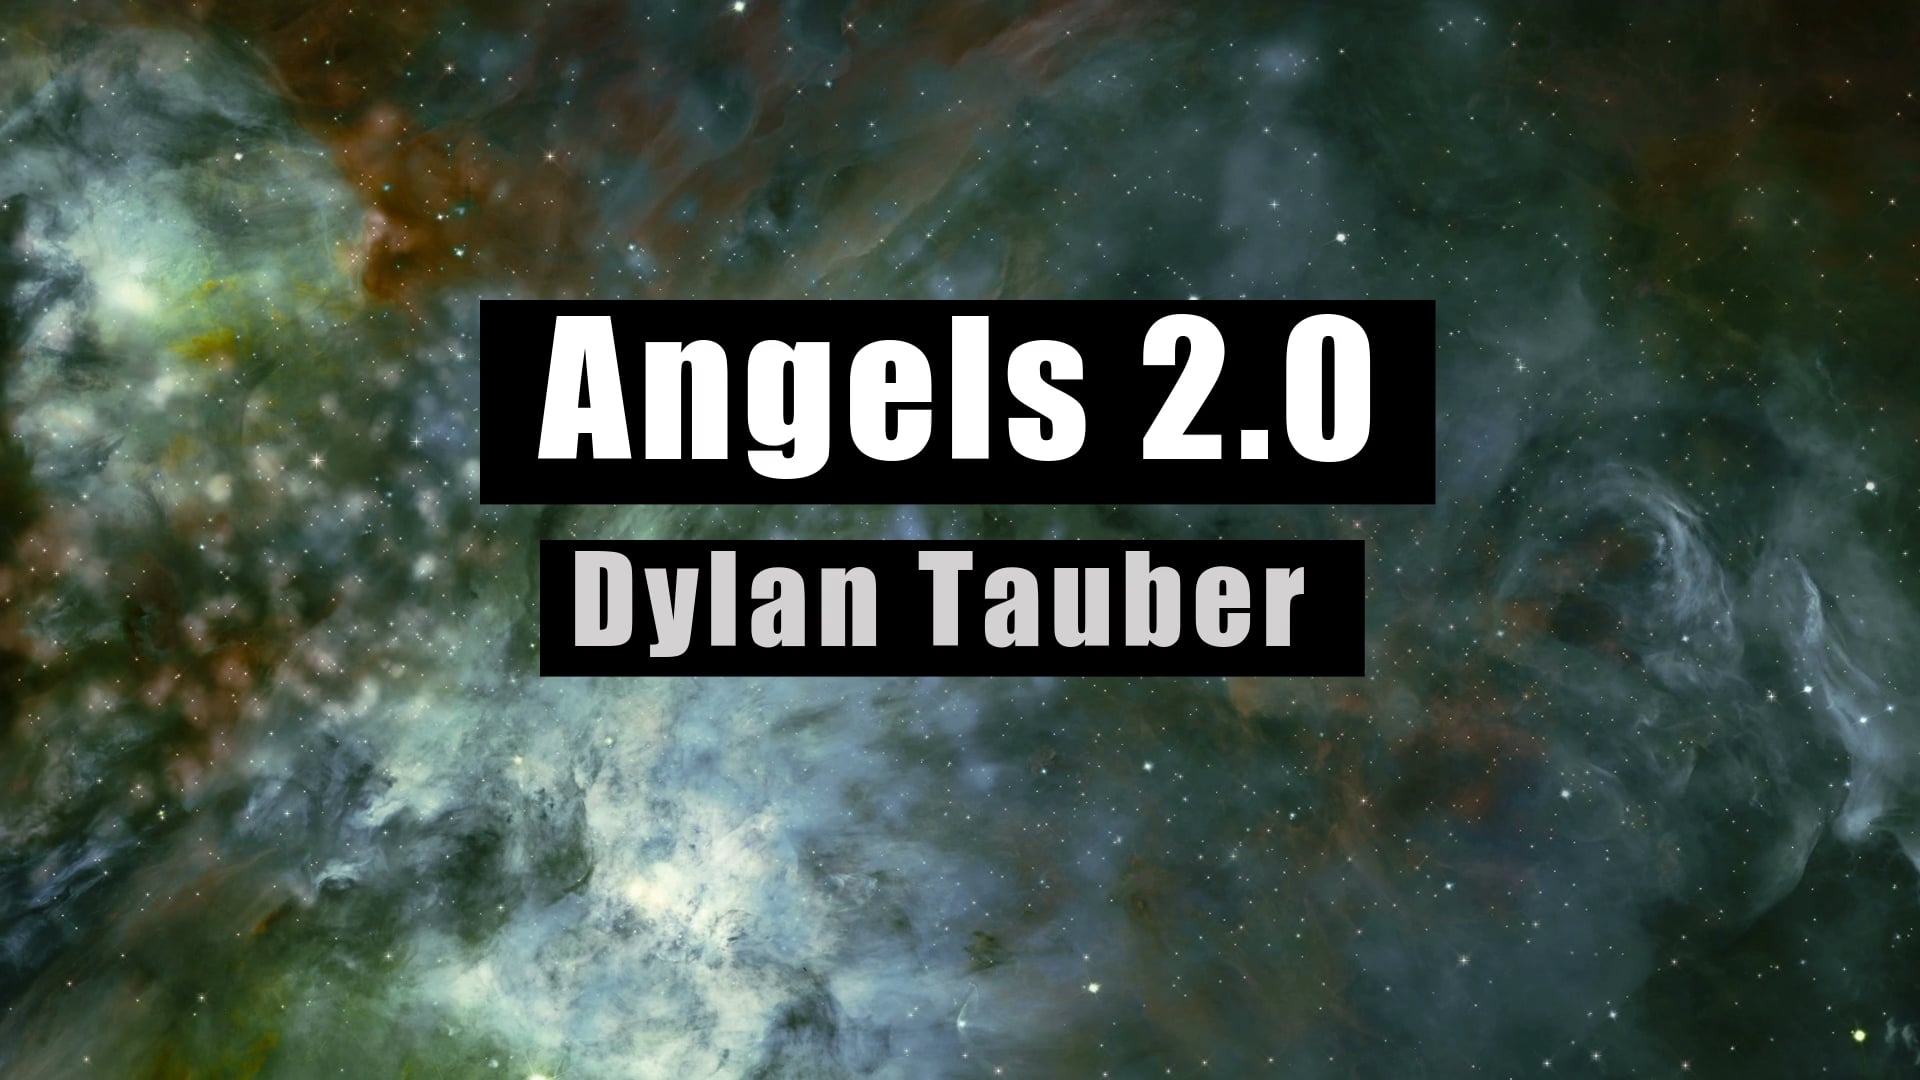 Angels 2.0 Music Video by Dylan Tauber